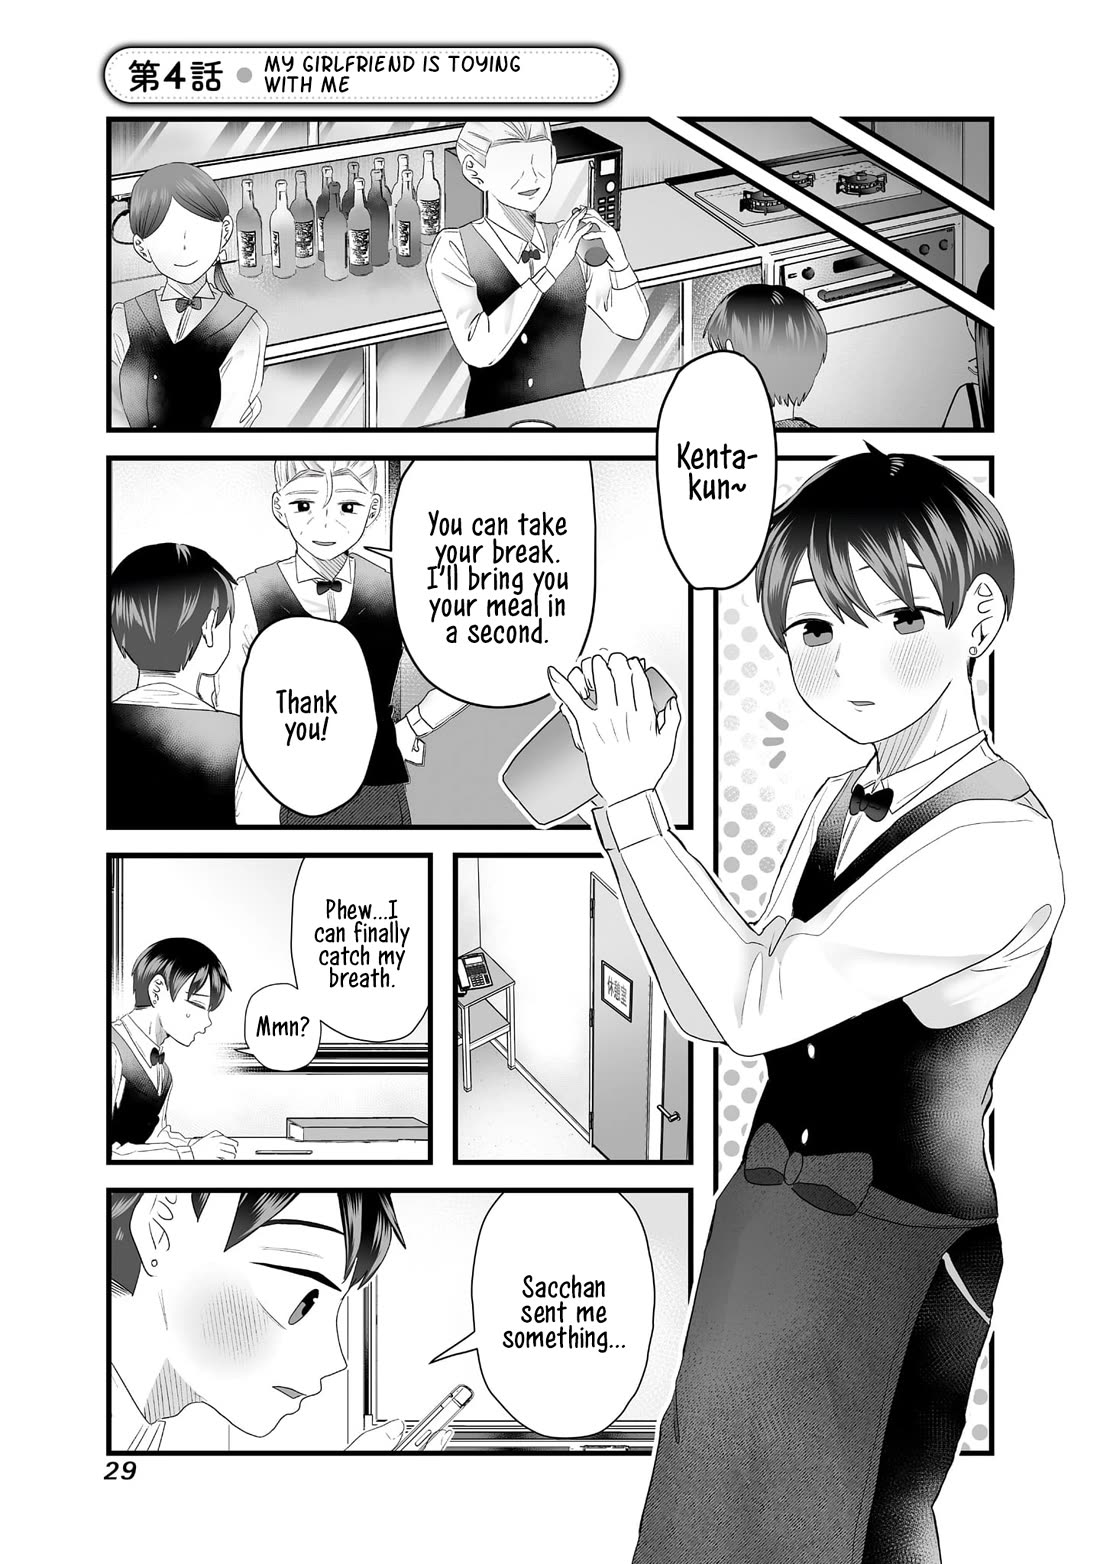 Sacchan and Ken-chan Are Going at it Again - chapter 4 - #1